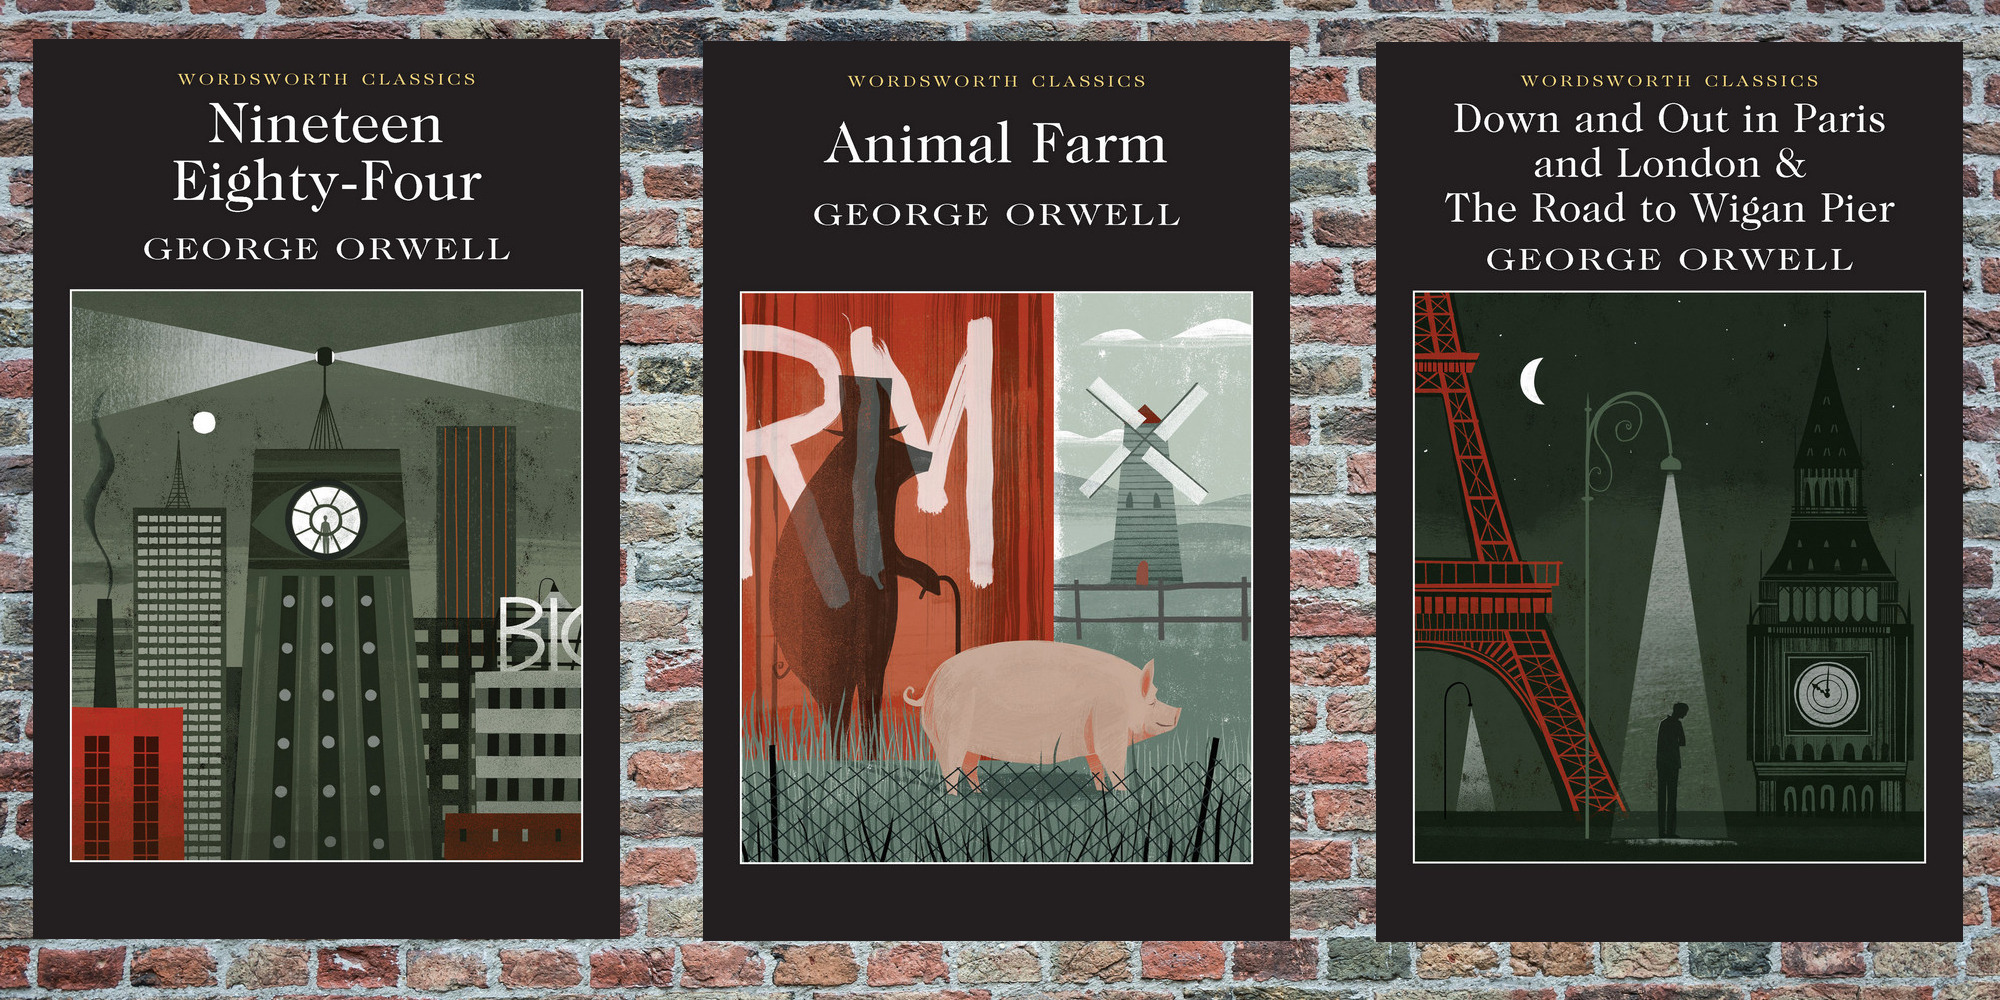 Front covers of Wordsworth Classics George Orwell books